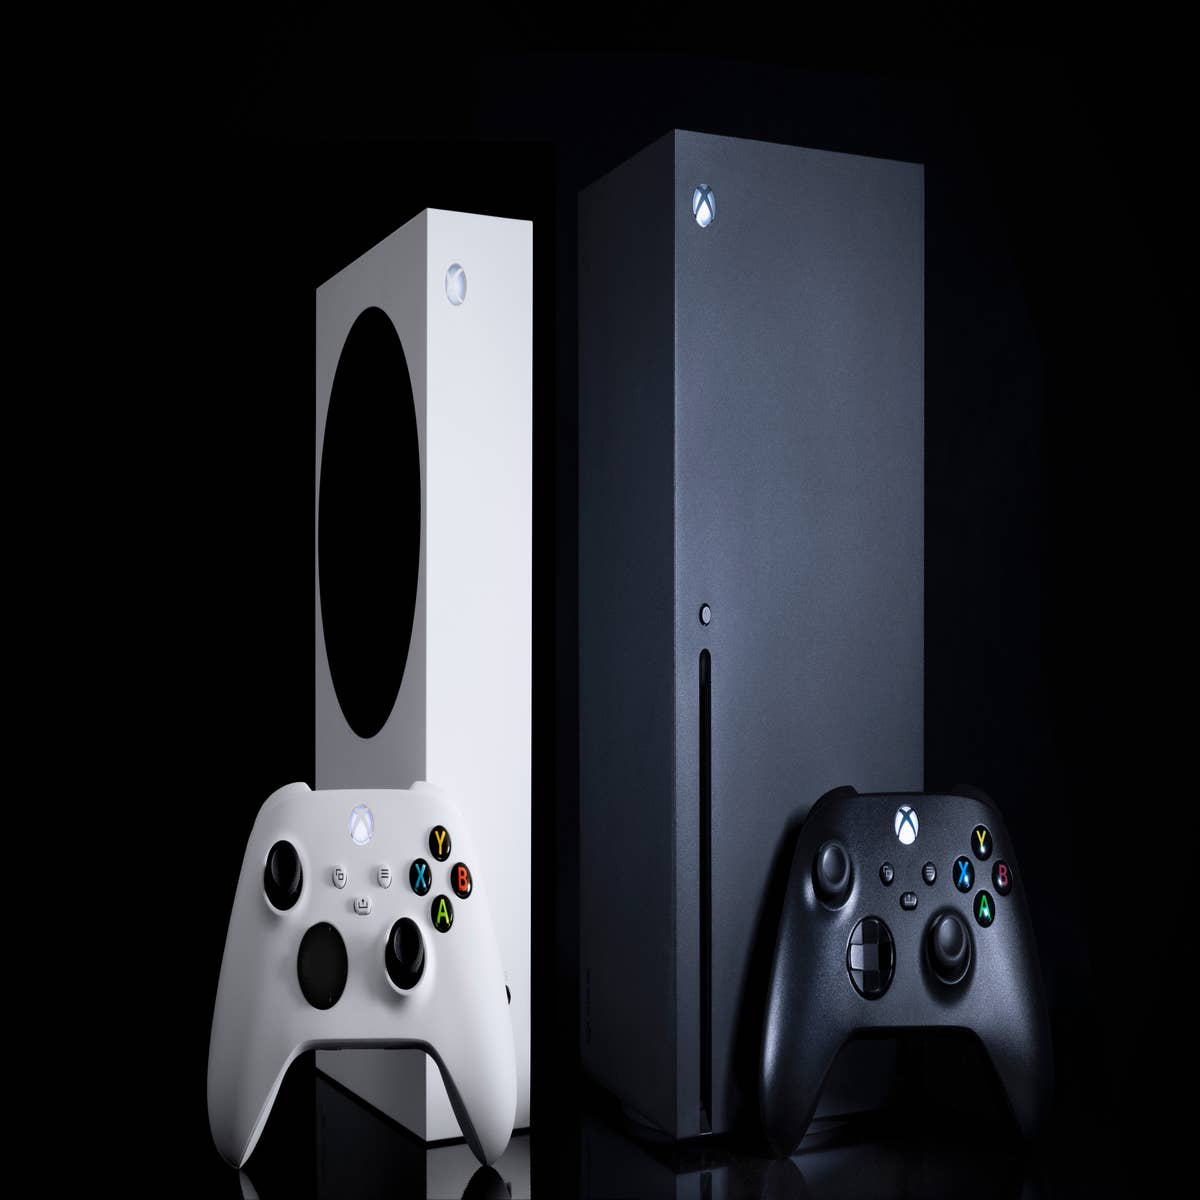 Microsoft stops selling the original Xbox One in US, UK: Reports